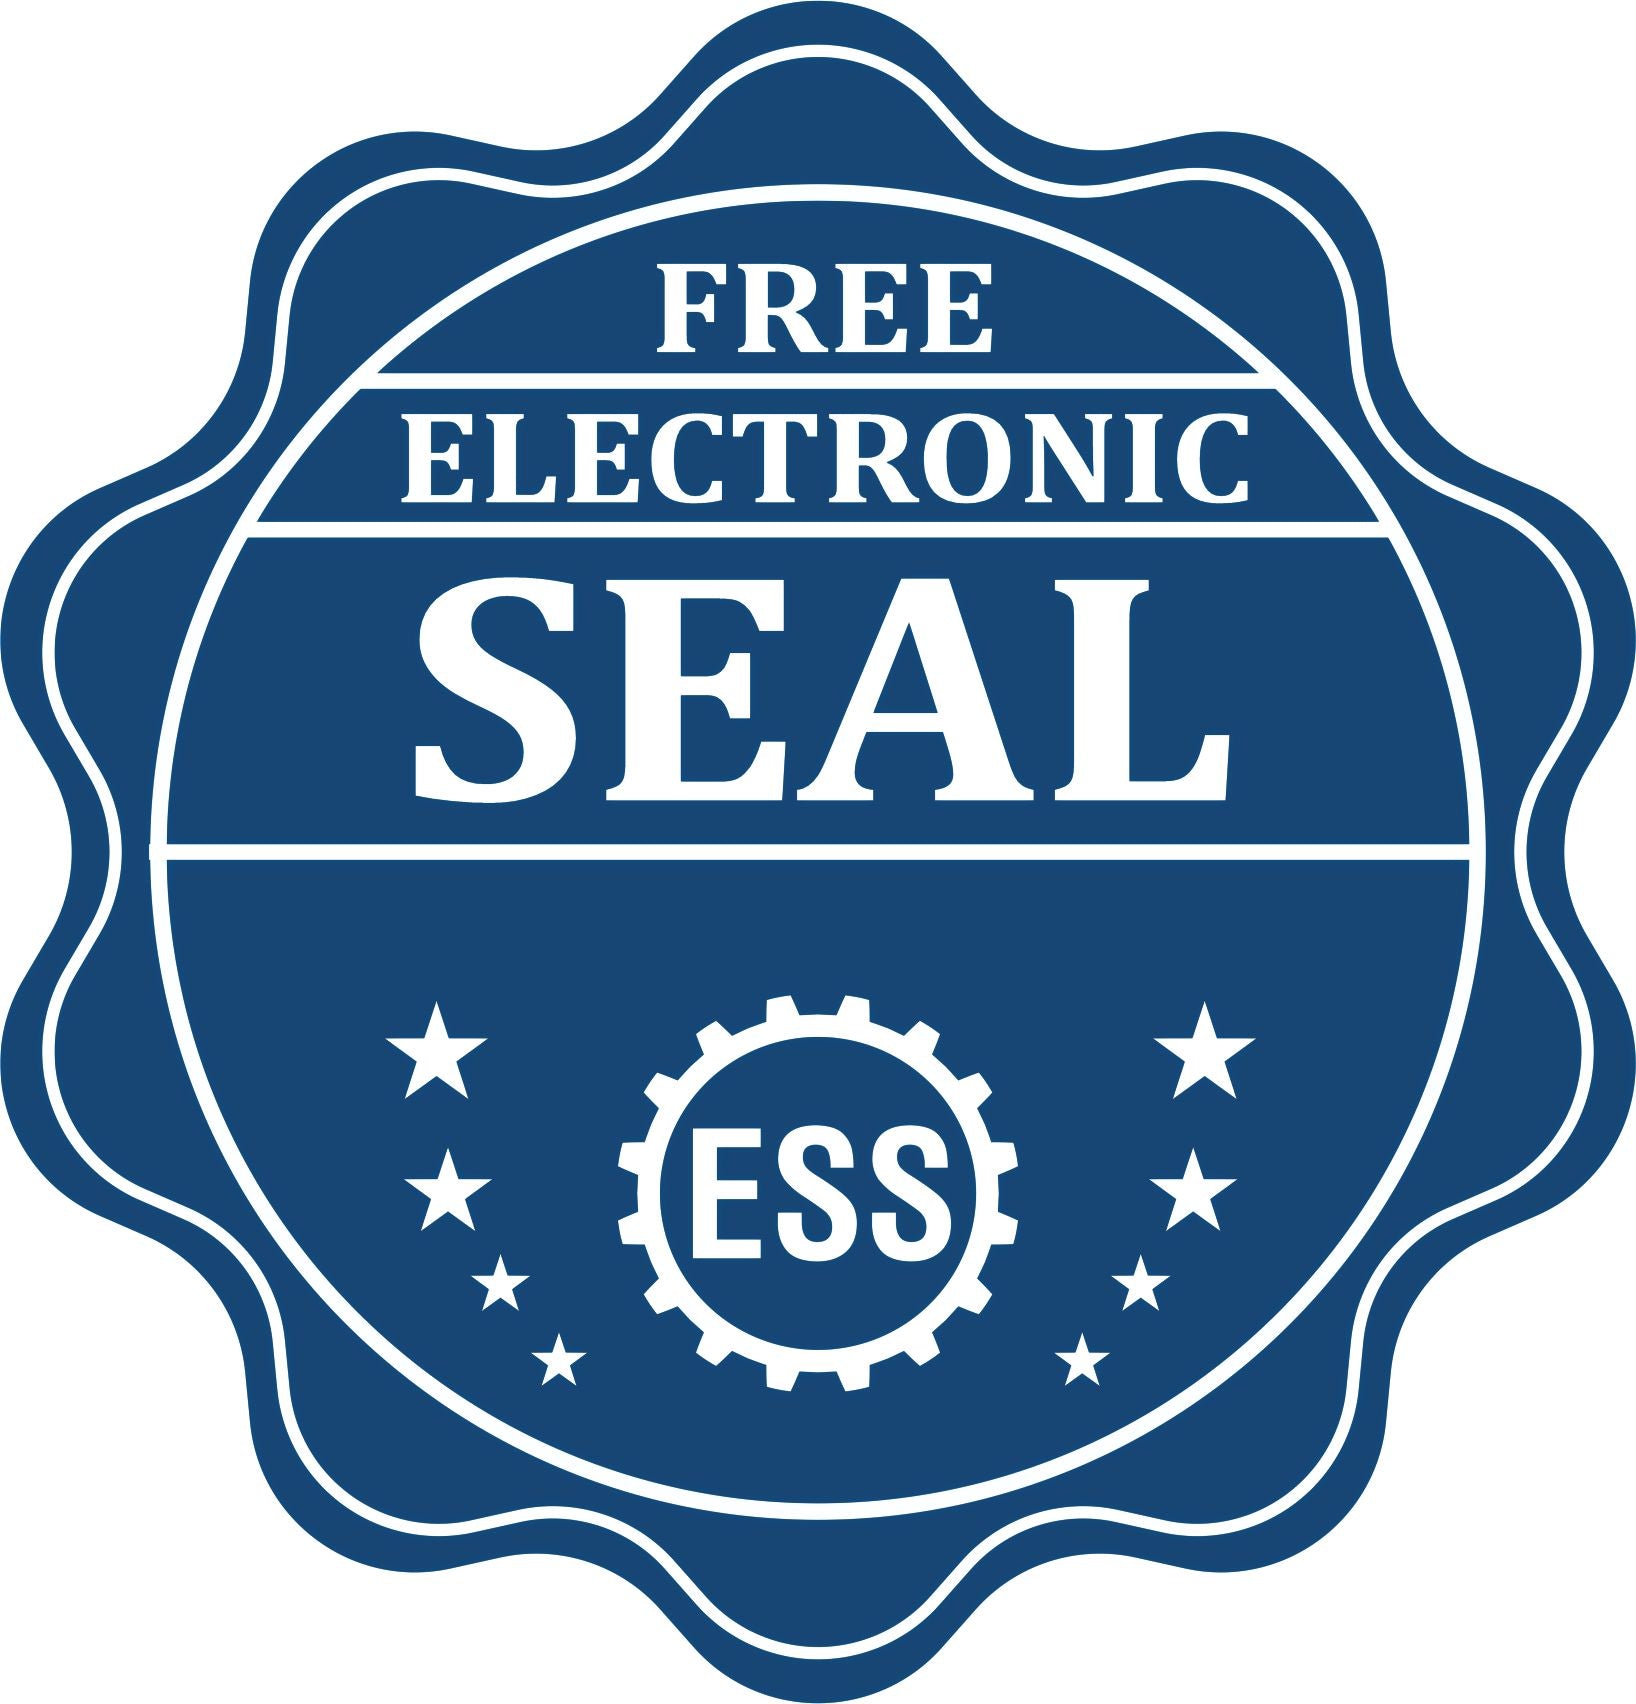 A badge showing a free electronic seal for the Heavy Duty Cast Iron Idaho Engineer Seal Embosser with stars and the ESS gear on the emblem.